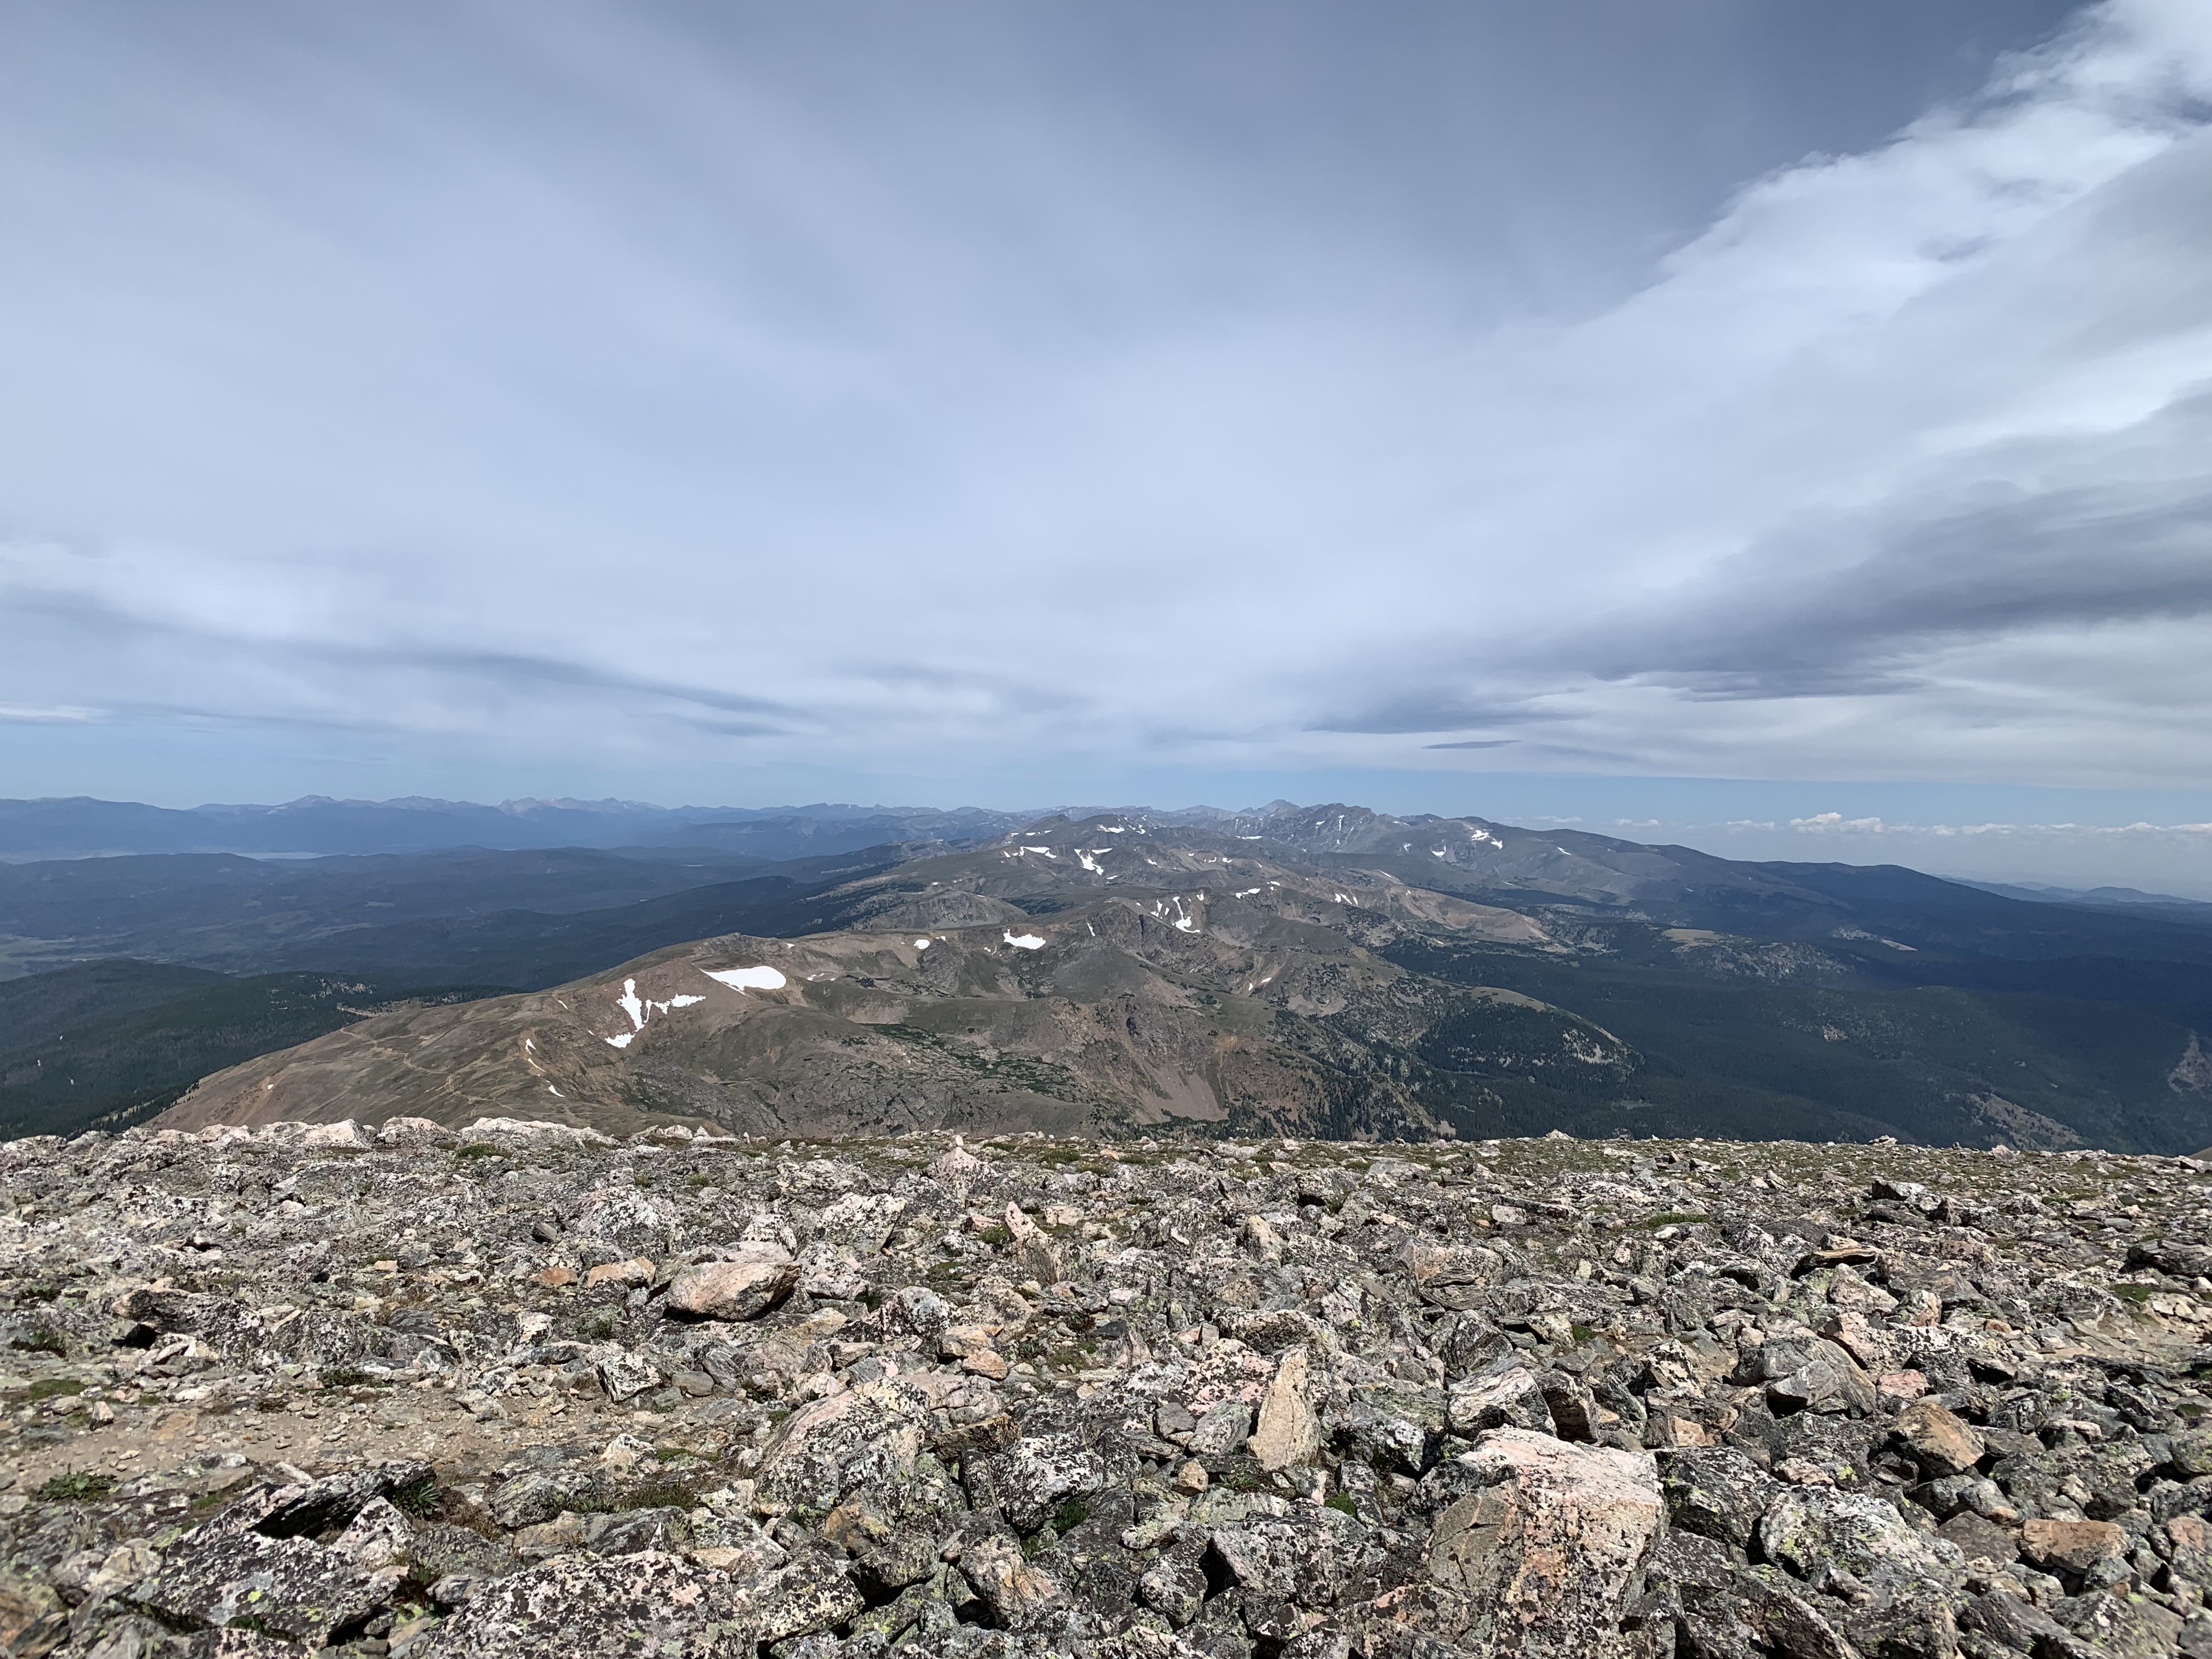 Looking at the divide from James Peak and feeling accomplished